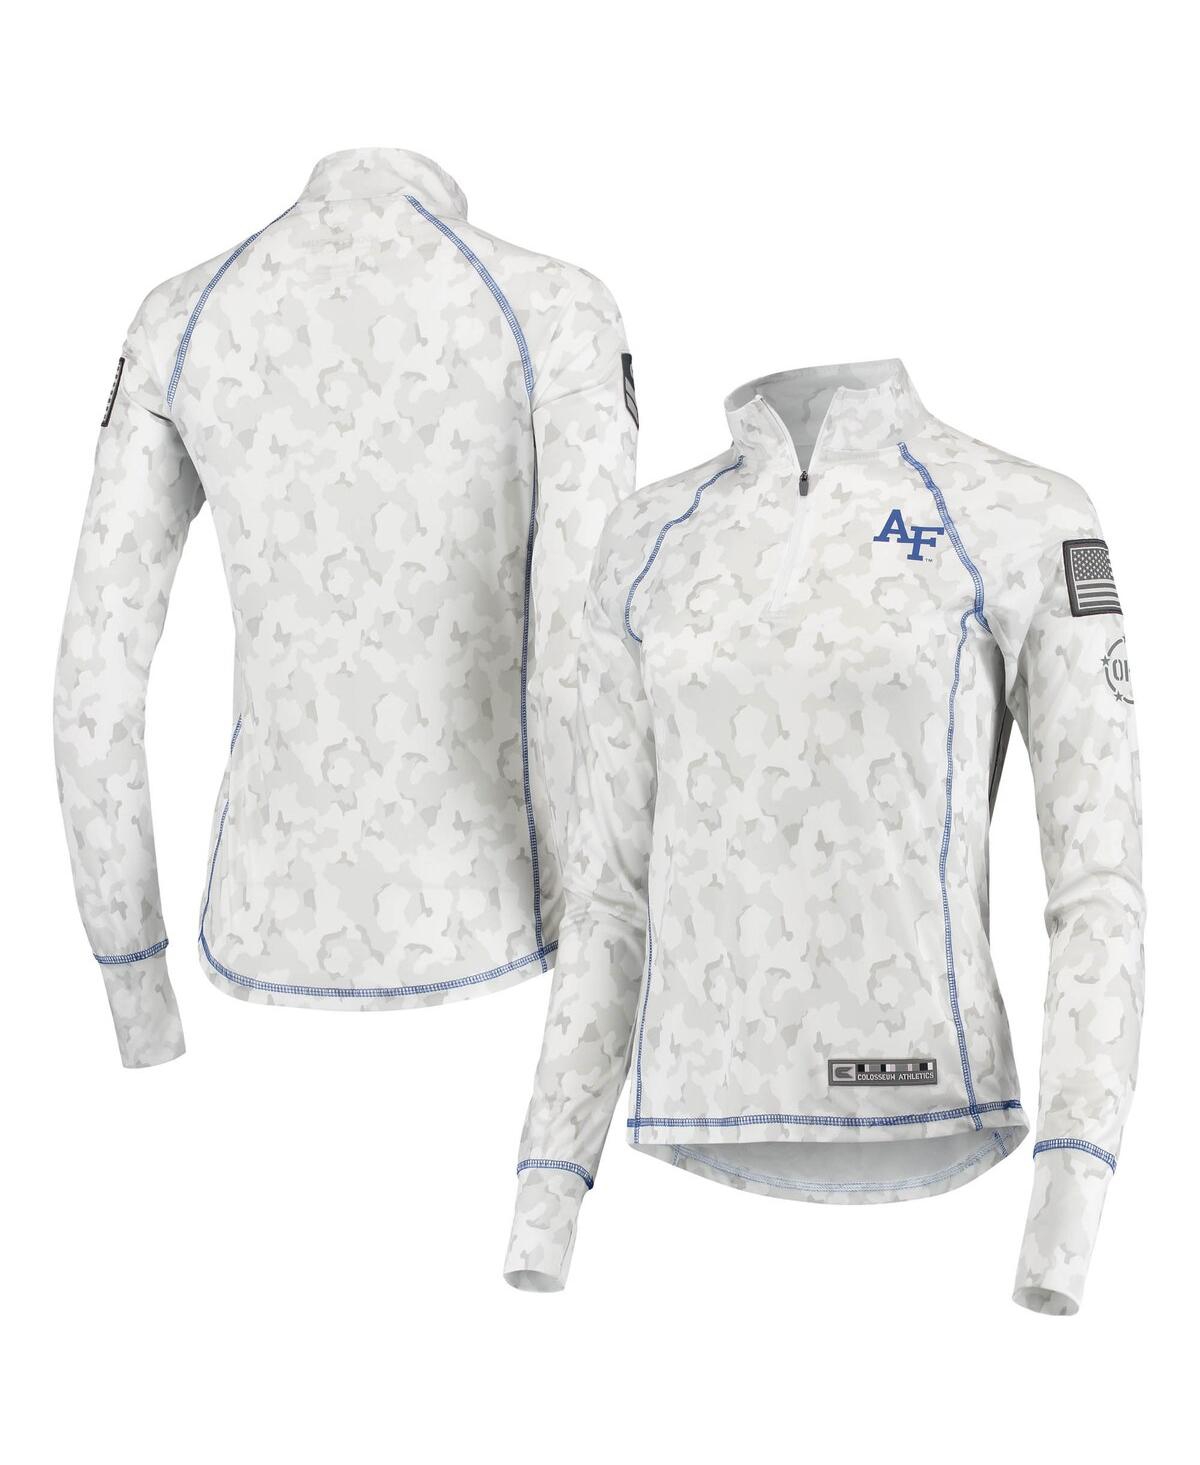 Women's Colosseum White Air Force Falcons Oht Military-Inspired Appreciation Officer Arctic Camo 1/4-Zip Jacket - White